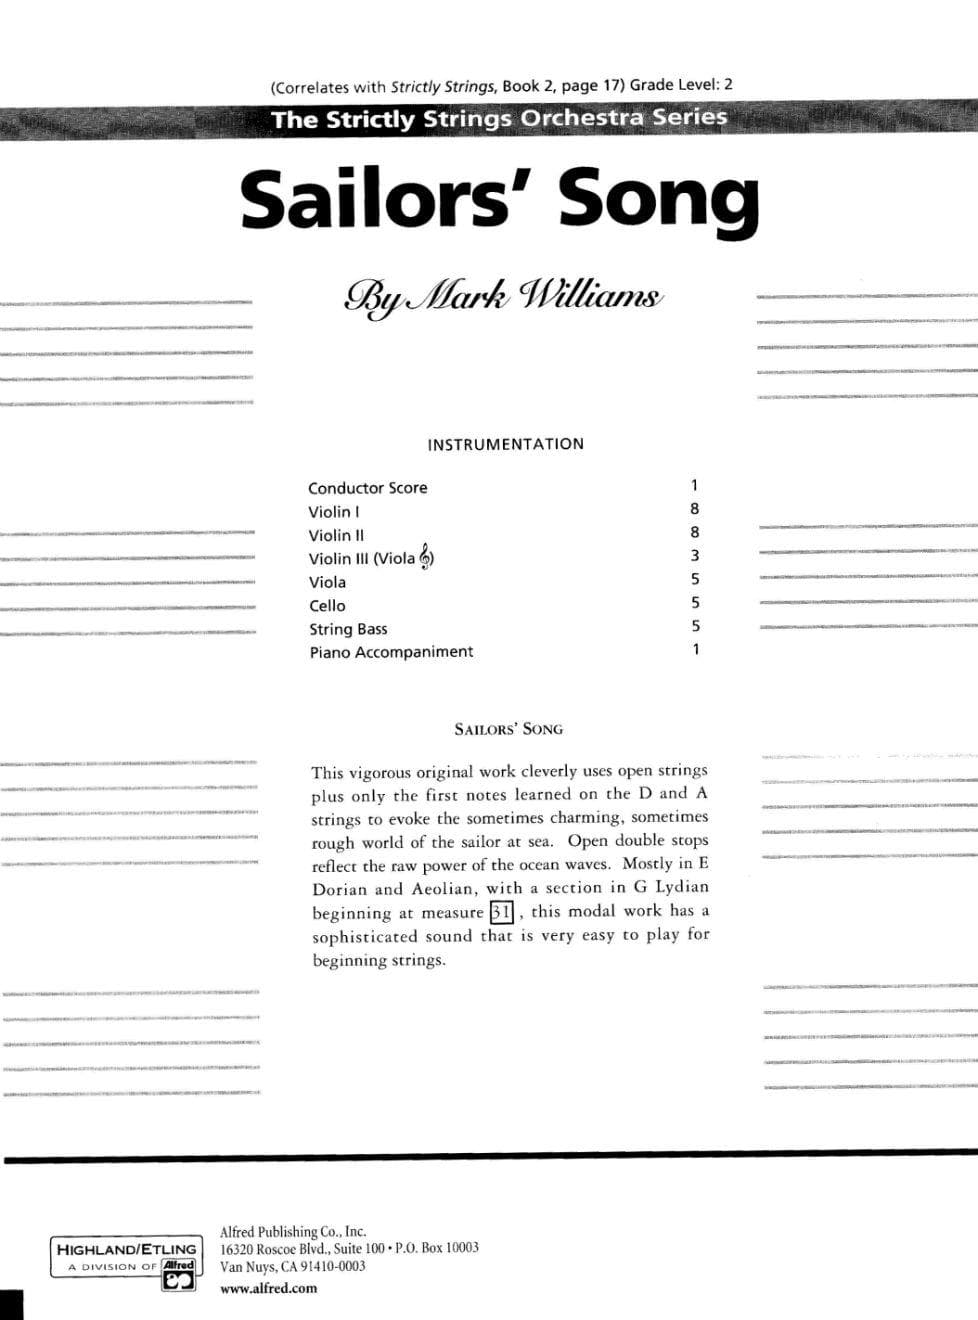 Williams-Sailor's Song Score and Parts